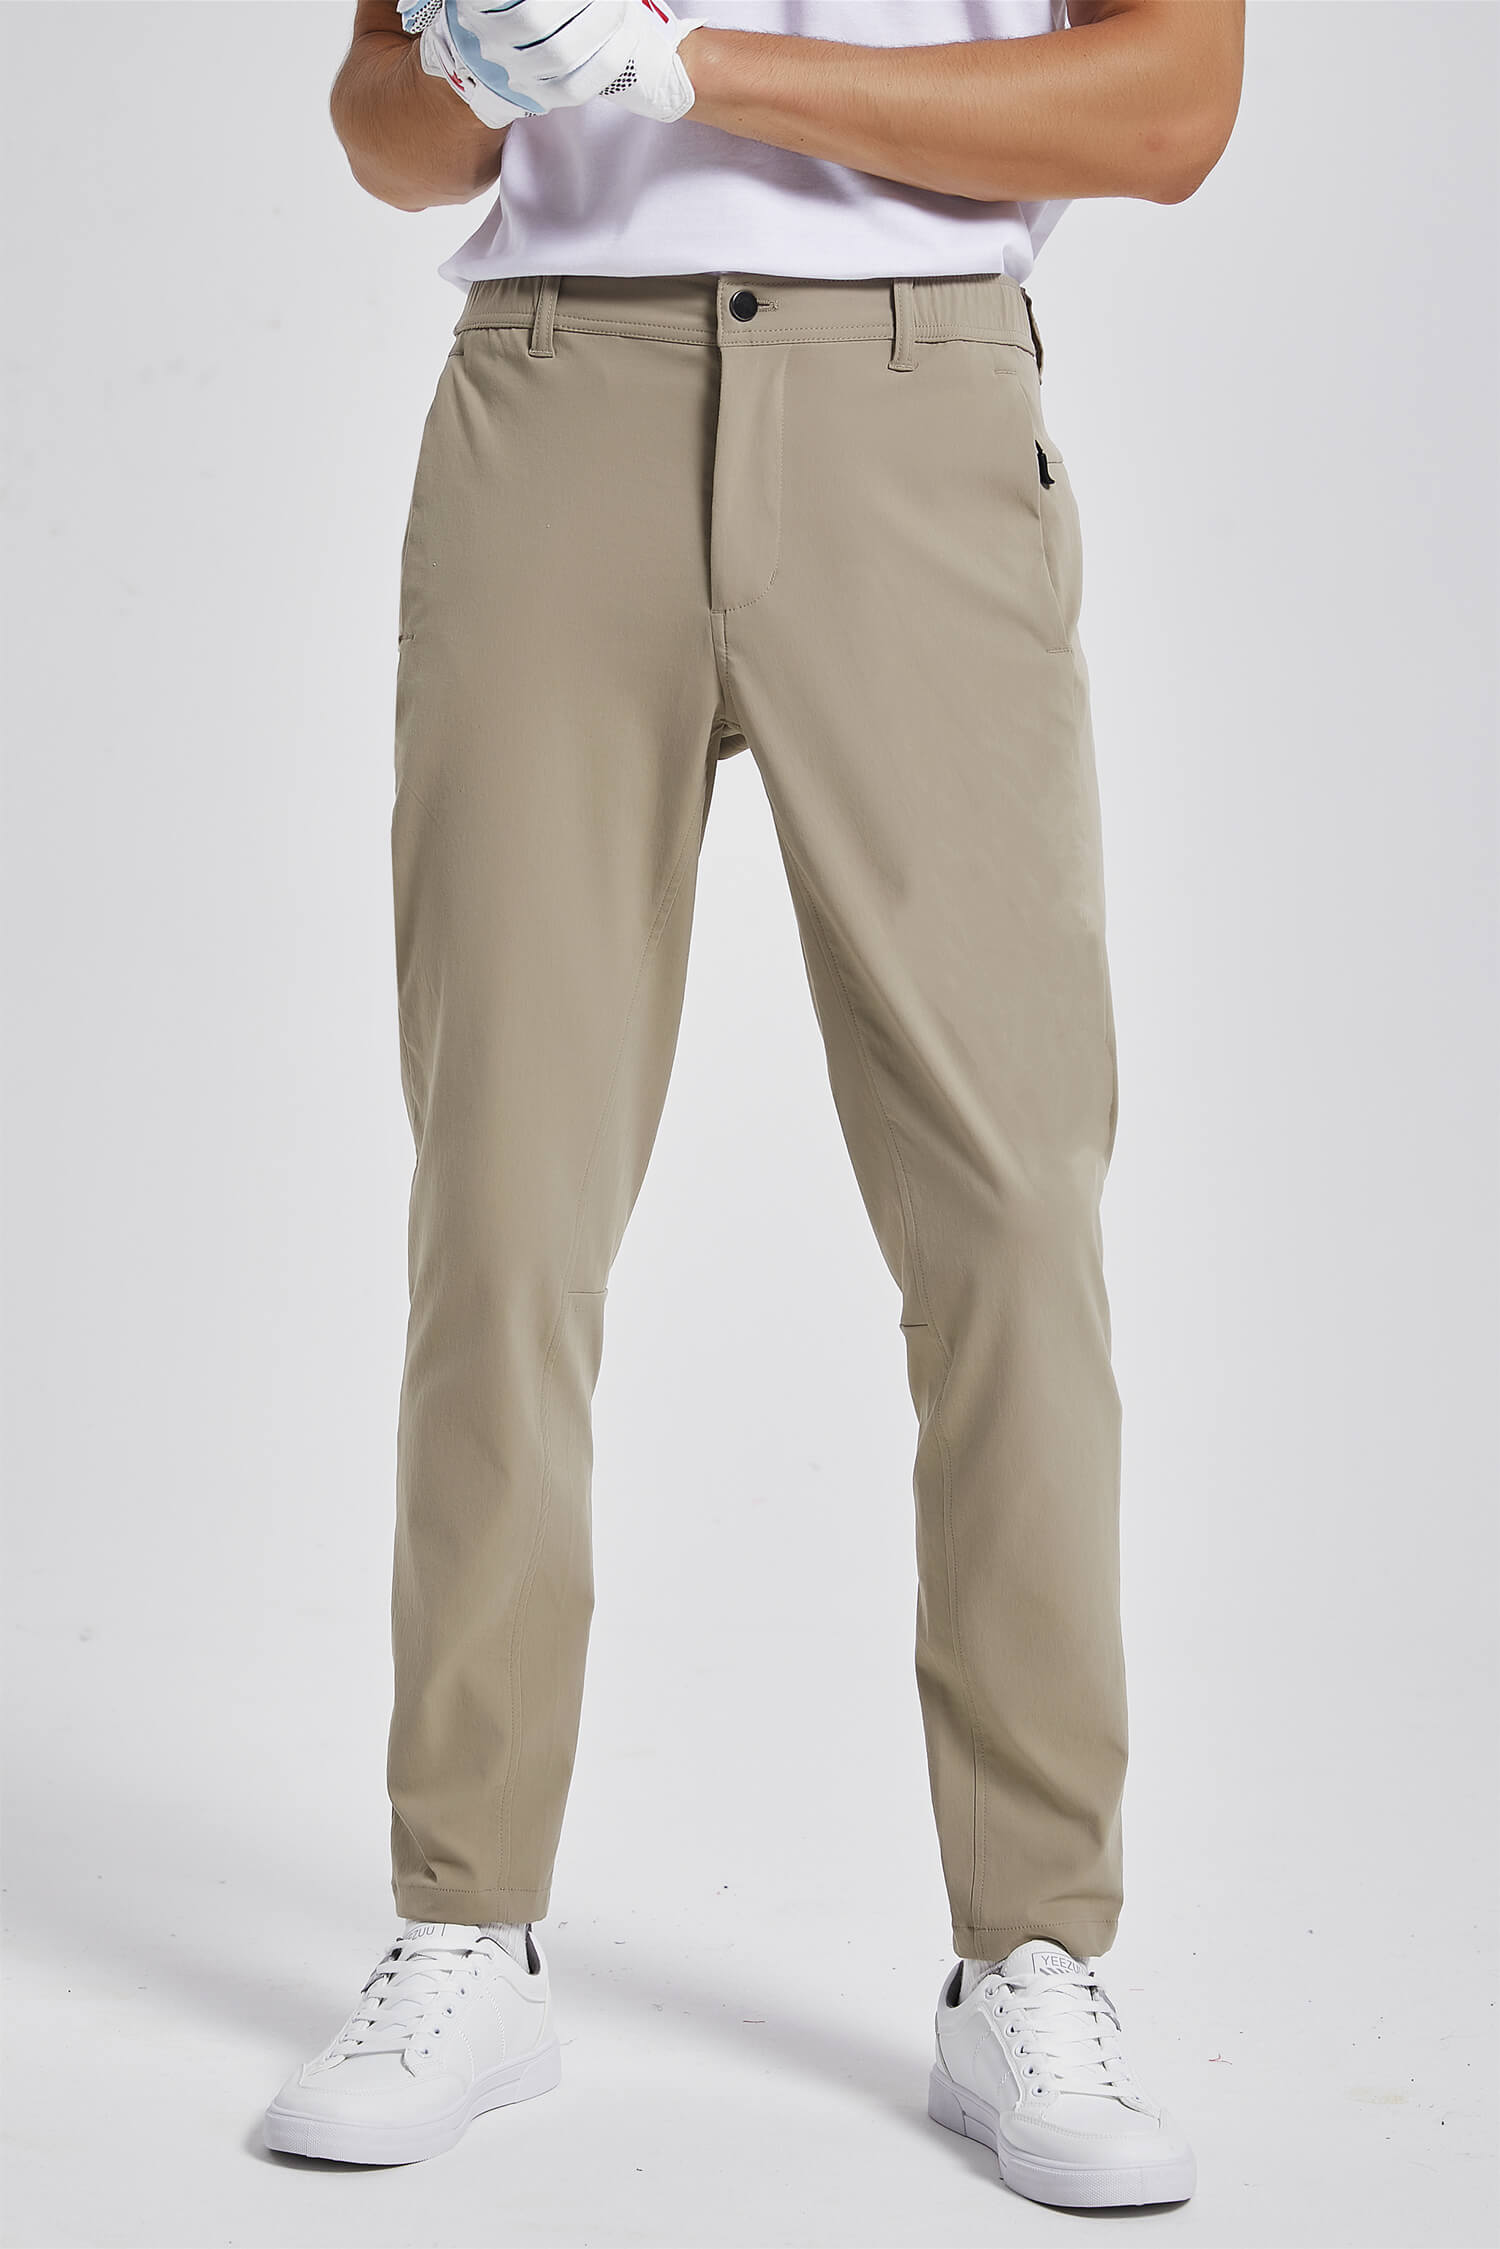 ALL IN MOTION, Men's golf 'Travel Trouser' Pants, Stretchy, CHOOSE SIZE &  COLOR